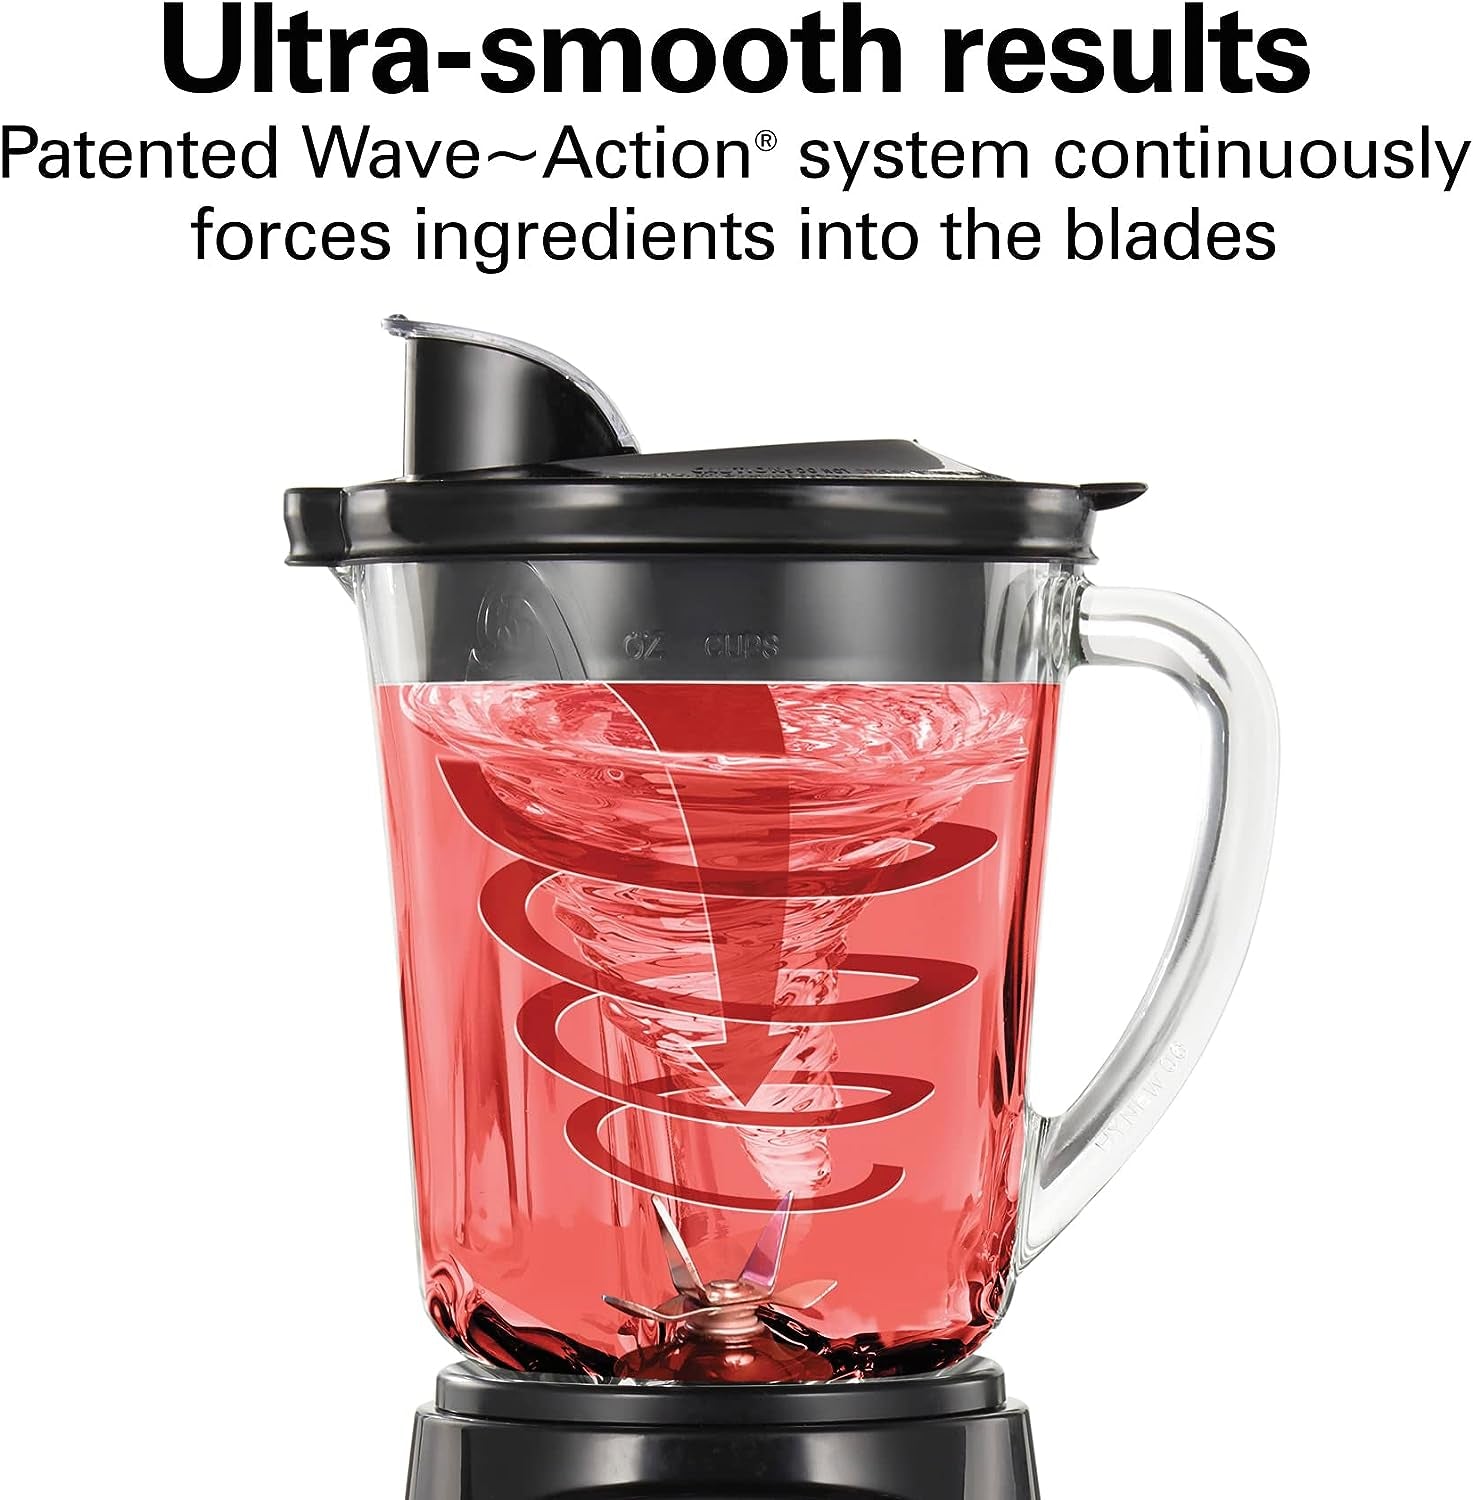 Power Elite Wave Action Blender for Shakes and Smoothies, Puree, Crush Ice, 40 Oz Glass Jar, 12 Functions, Stainless Steel Ice Sabre Blades, 700 Watts, Black (58148A)